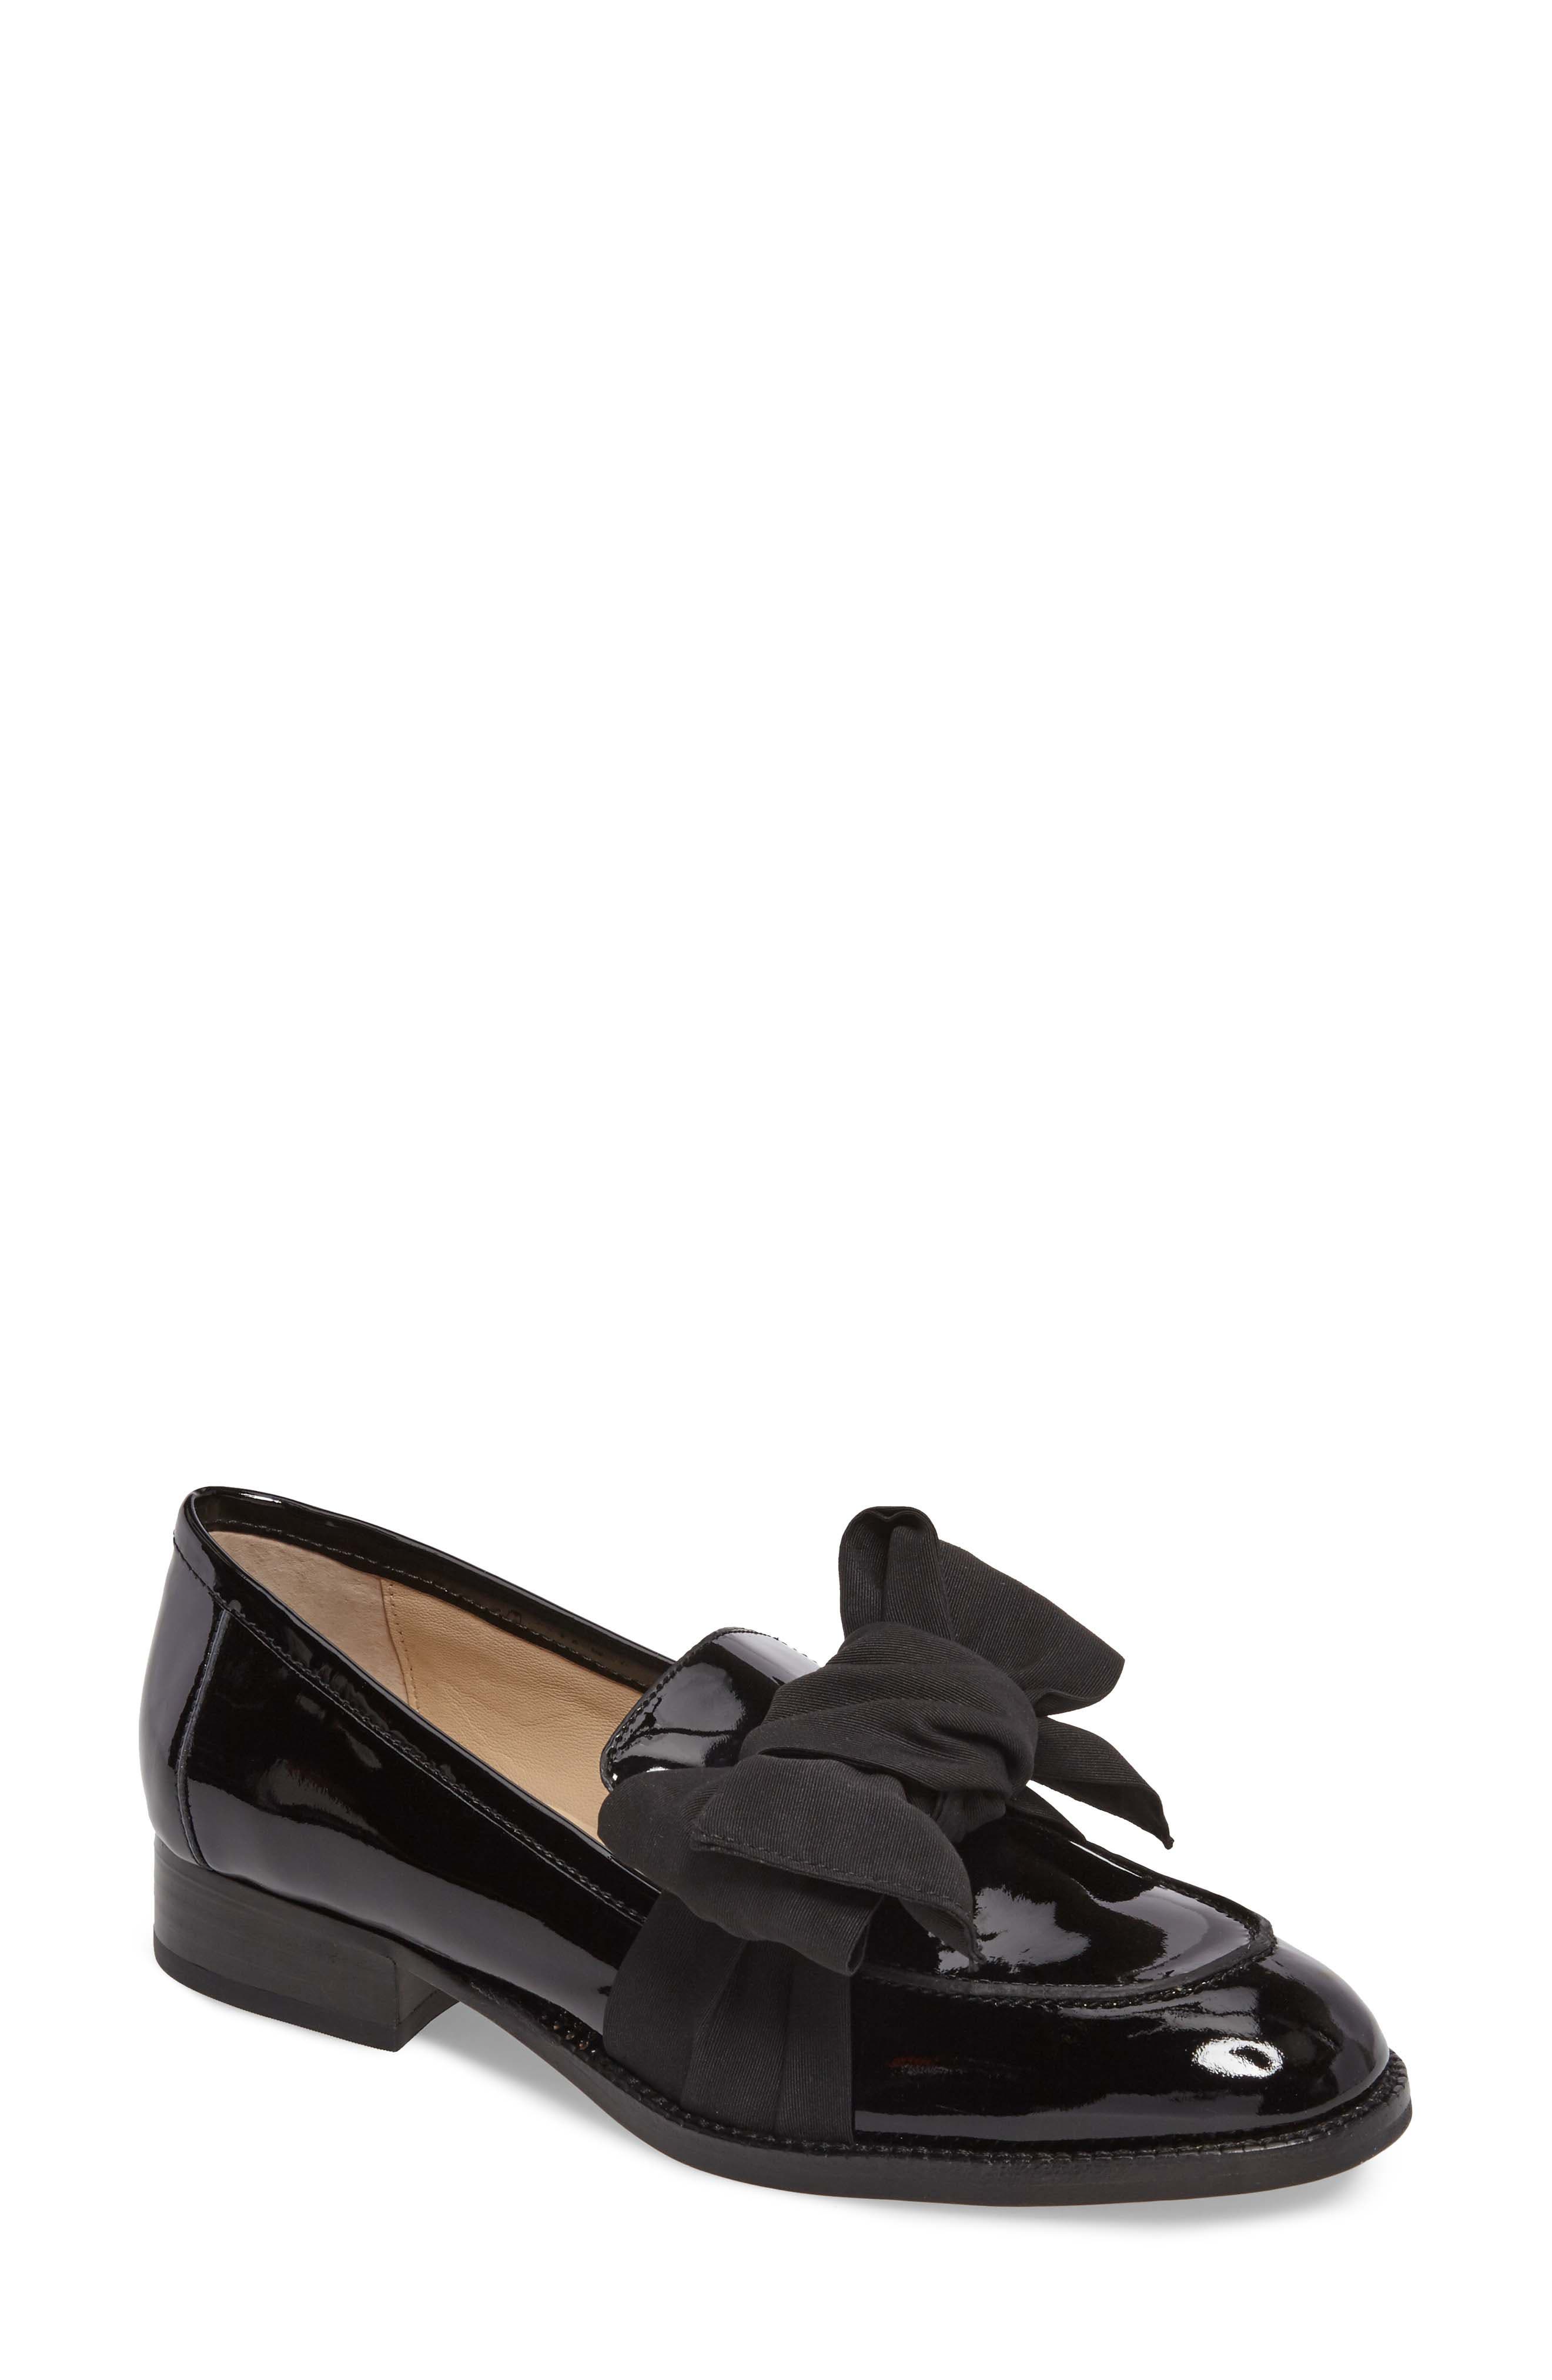 botkier loafers